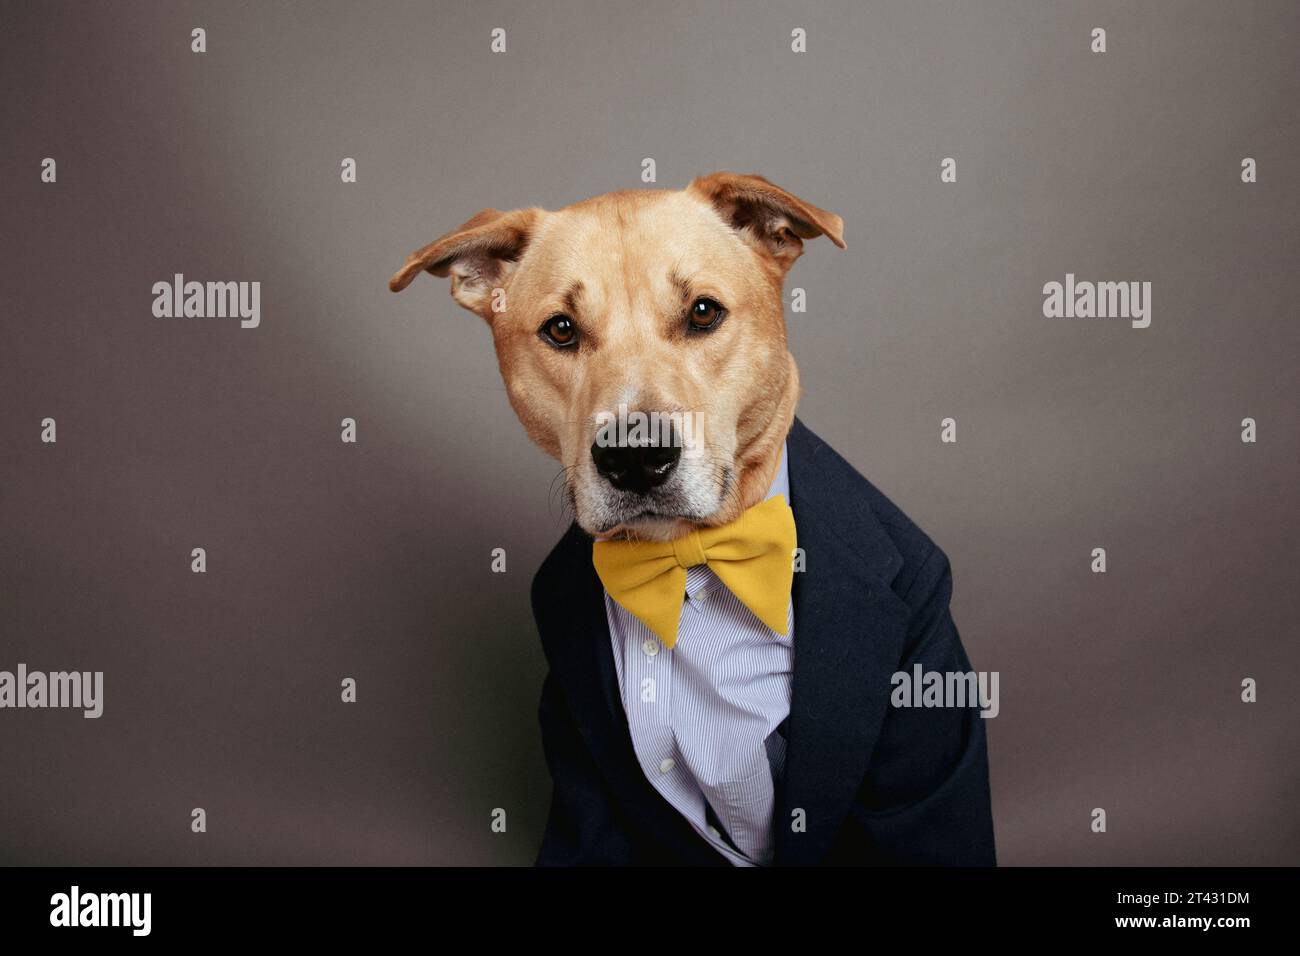 Portrait of a labrador retriever mix dog dressed in a shirt, bow tie and jacket Stock Photo